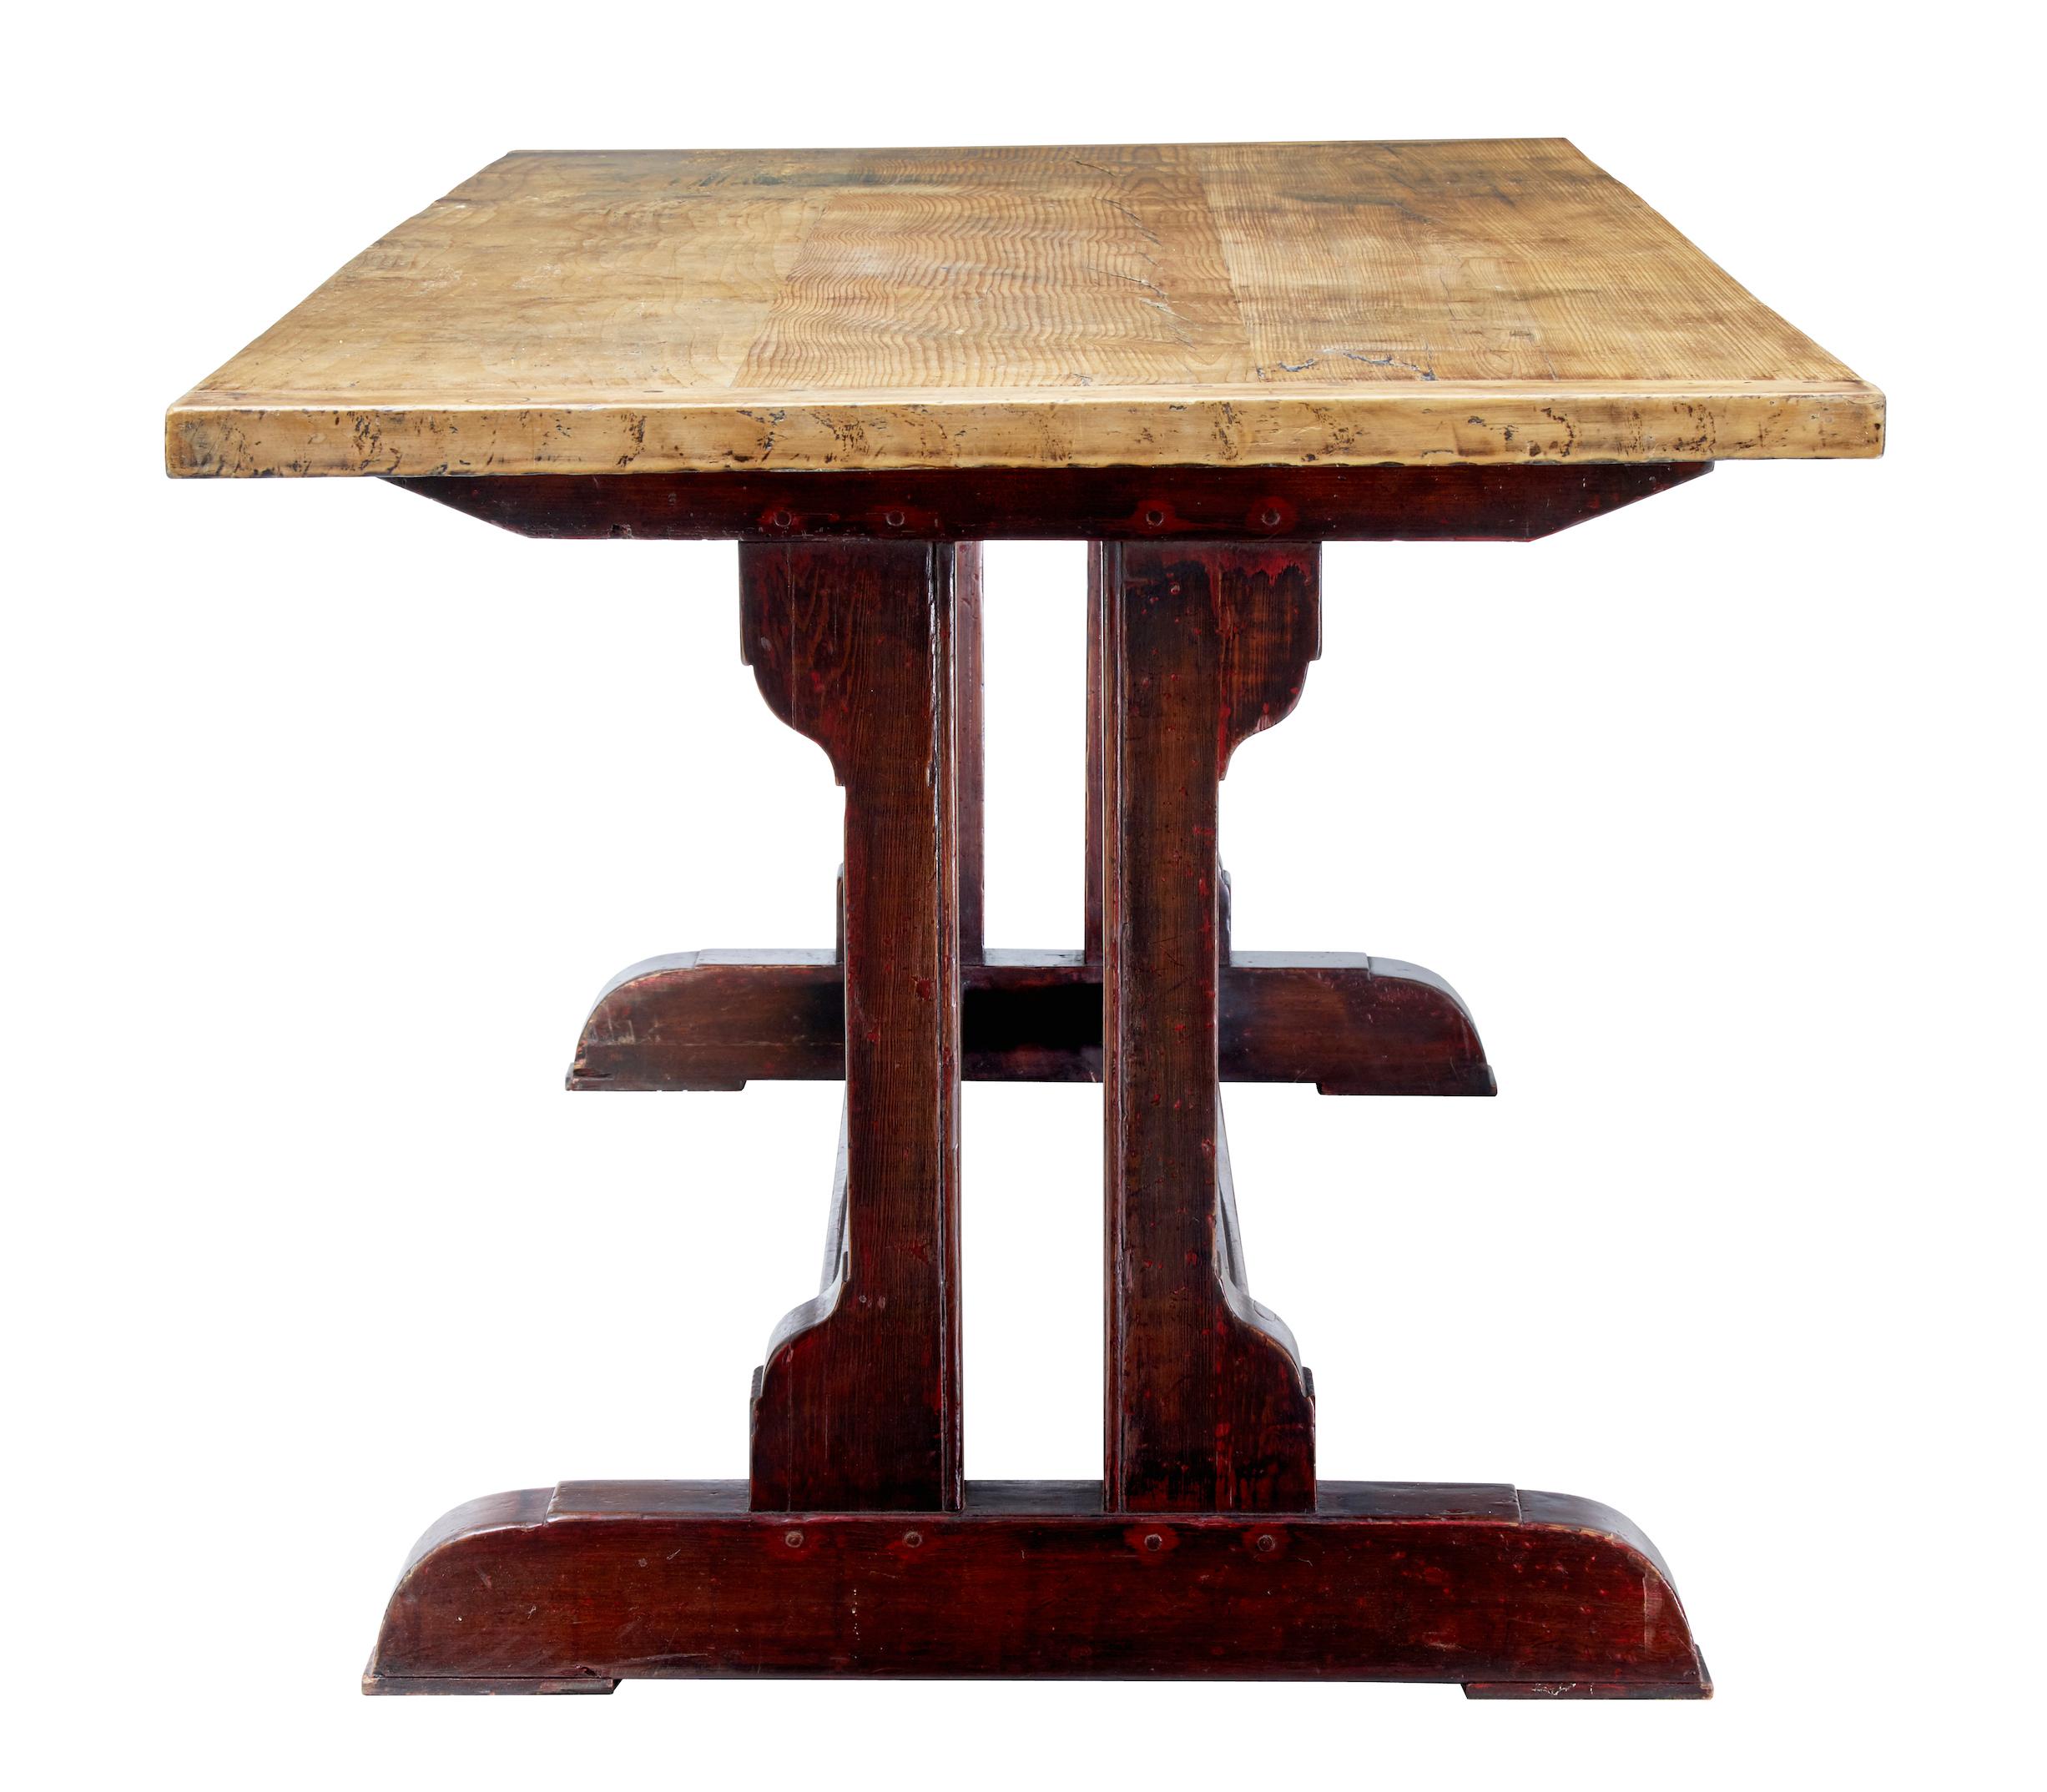 Beautiful rustic Swedish dining table, circa 1860.

Trestle end base united by two central stretchers with original paint. Original pine top with cleated ends and dowels.

Seats a comfortable eight.

Obvious signs of use on the top surface and